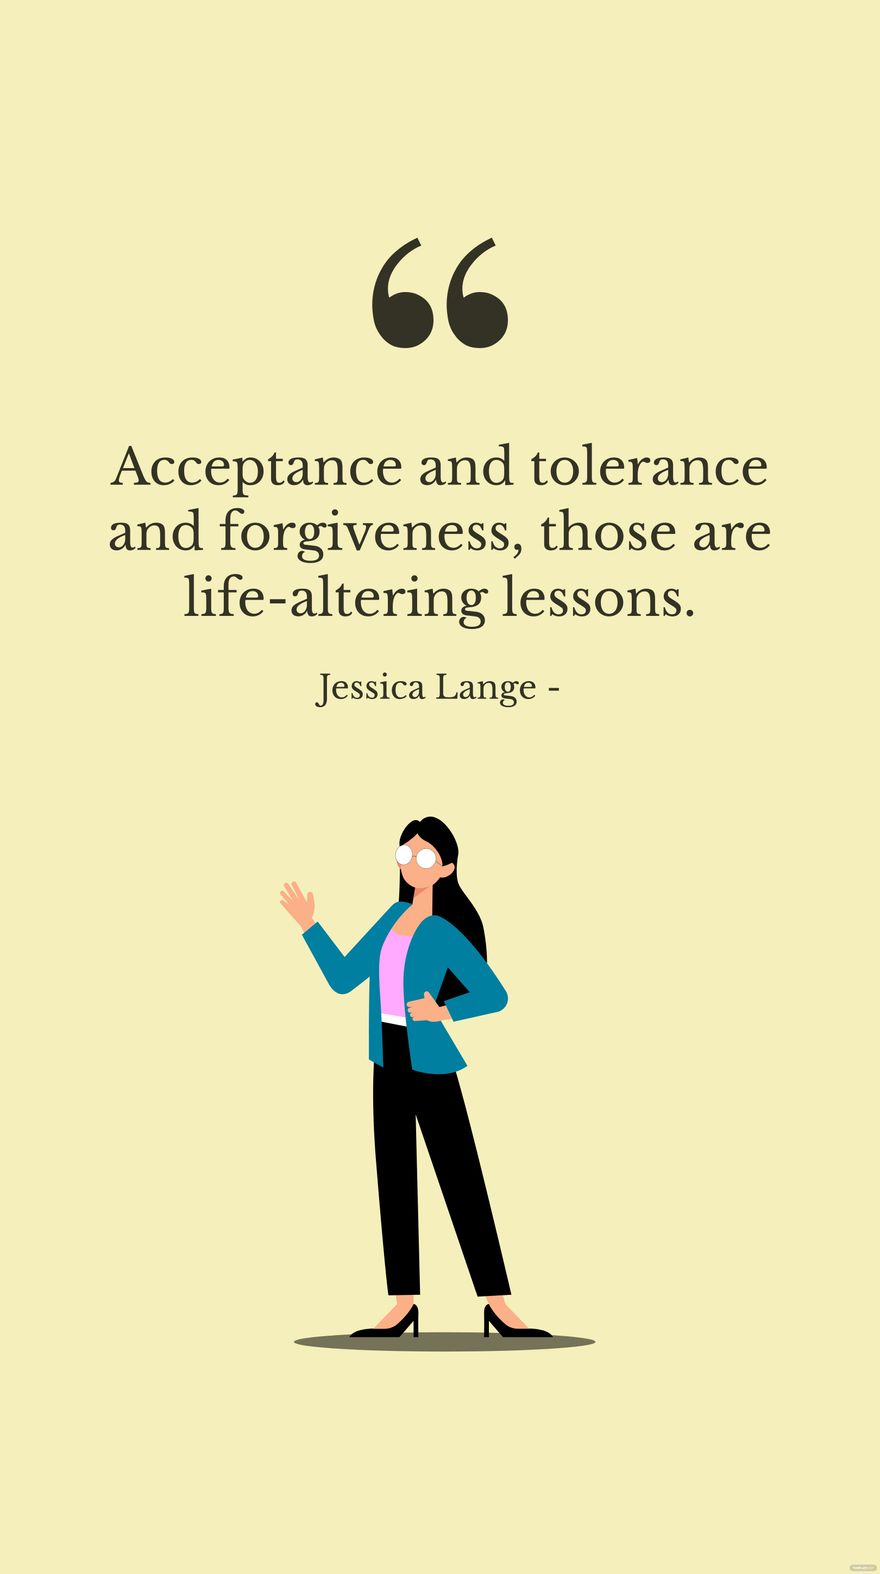 Free Jessica Lange - Acceptance and tolerance and forgiveness, those are life-altering lessons. in JPG